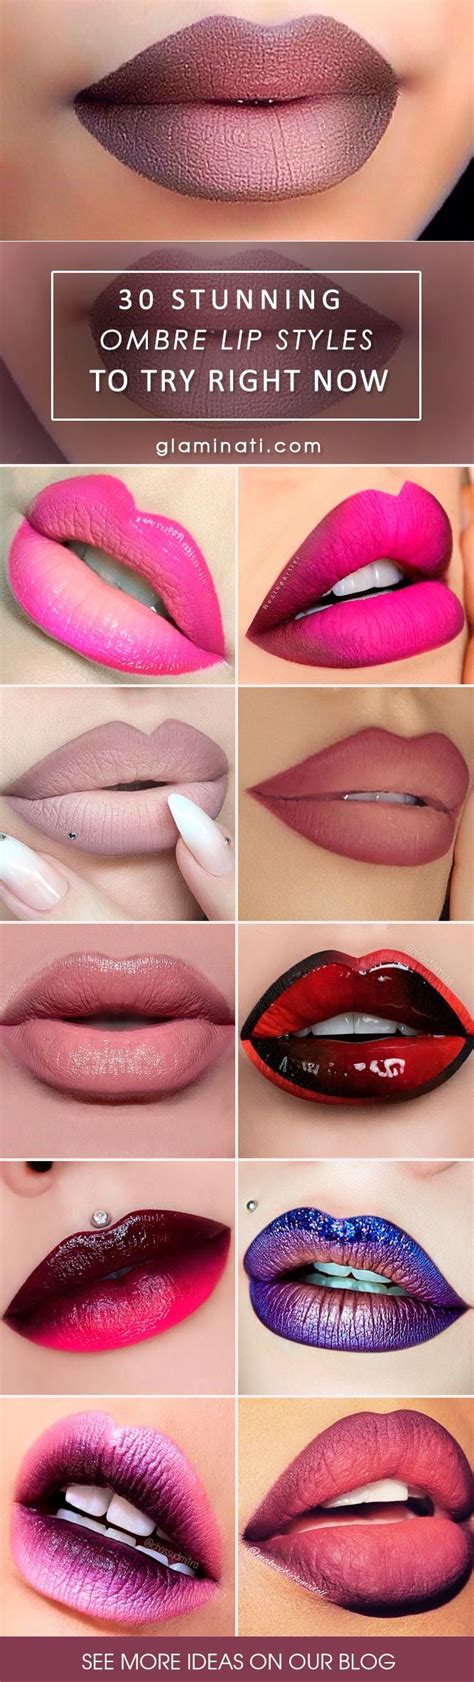 Ombre Lips: 42 Stunning Lip Styles To Try Right Now | Ombre lips, Lip makeup tutorial, Ombre ...